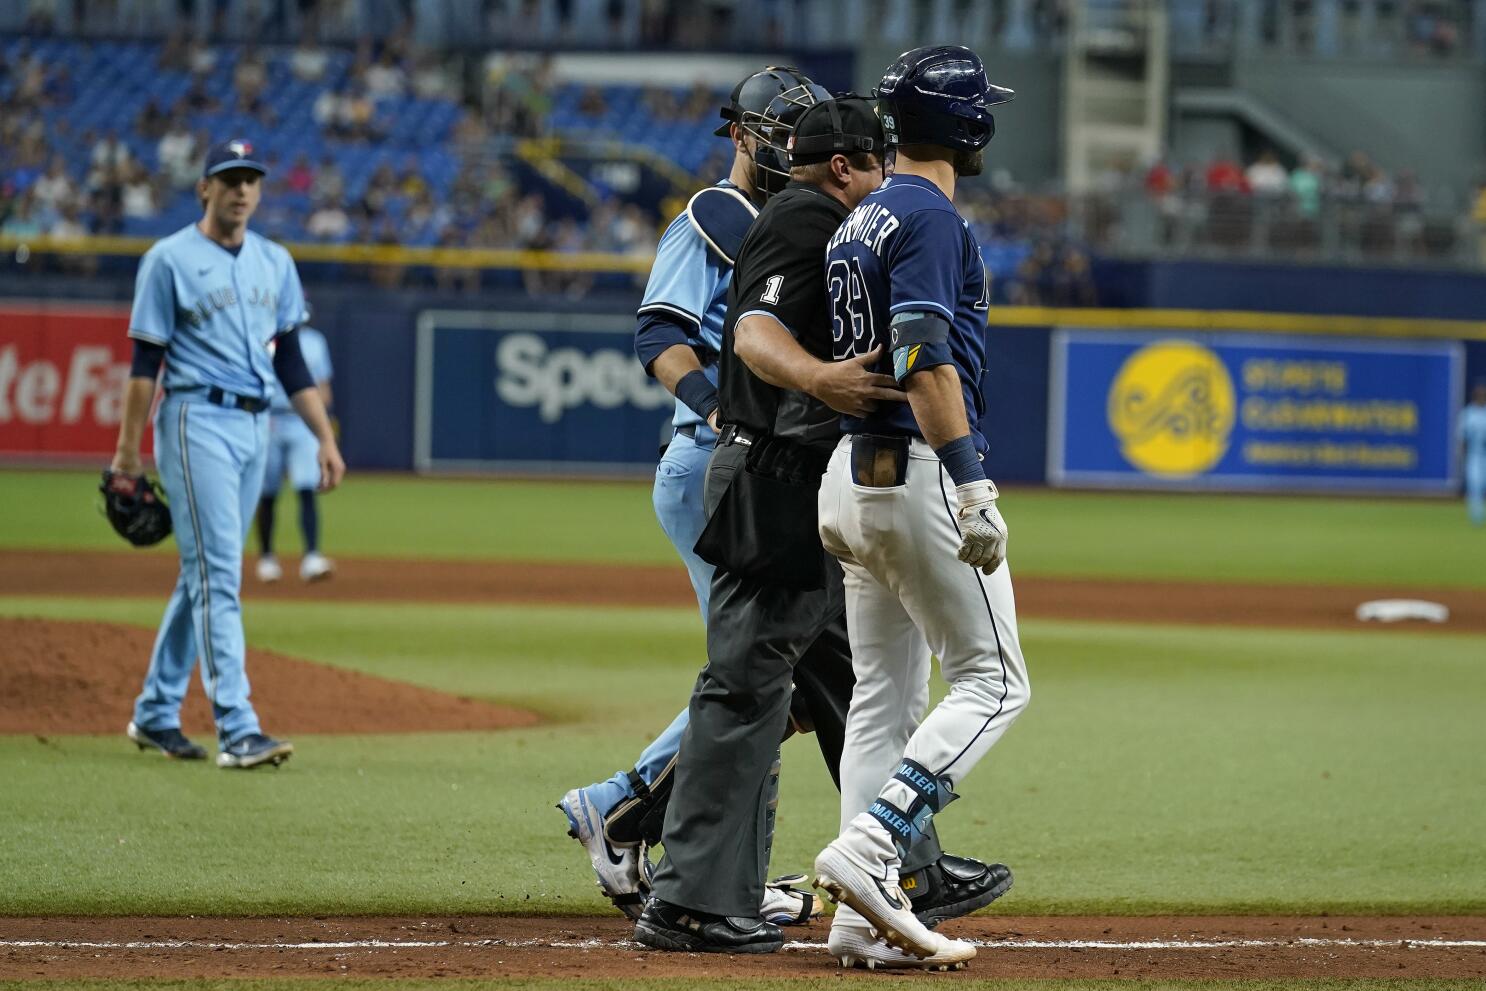 Home-grown roster: the all-time, all-area Tampa Bay Rays lineup